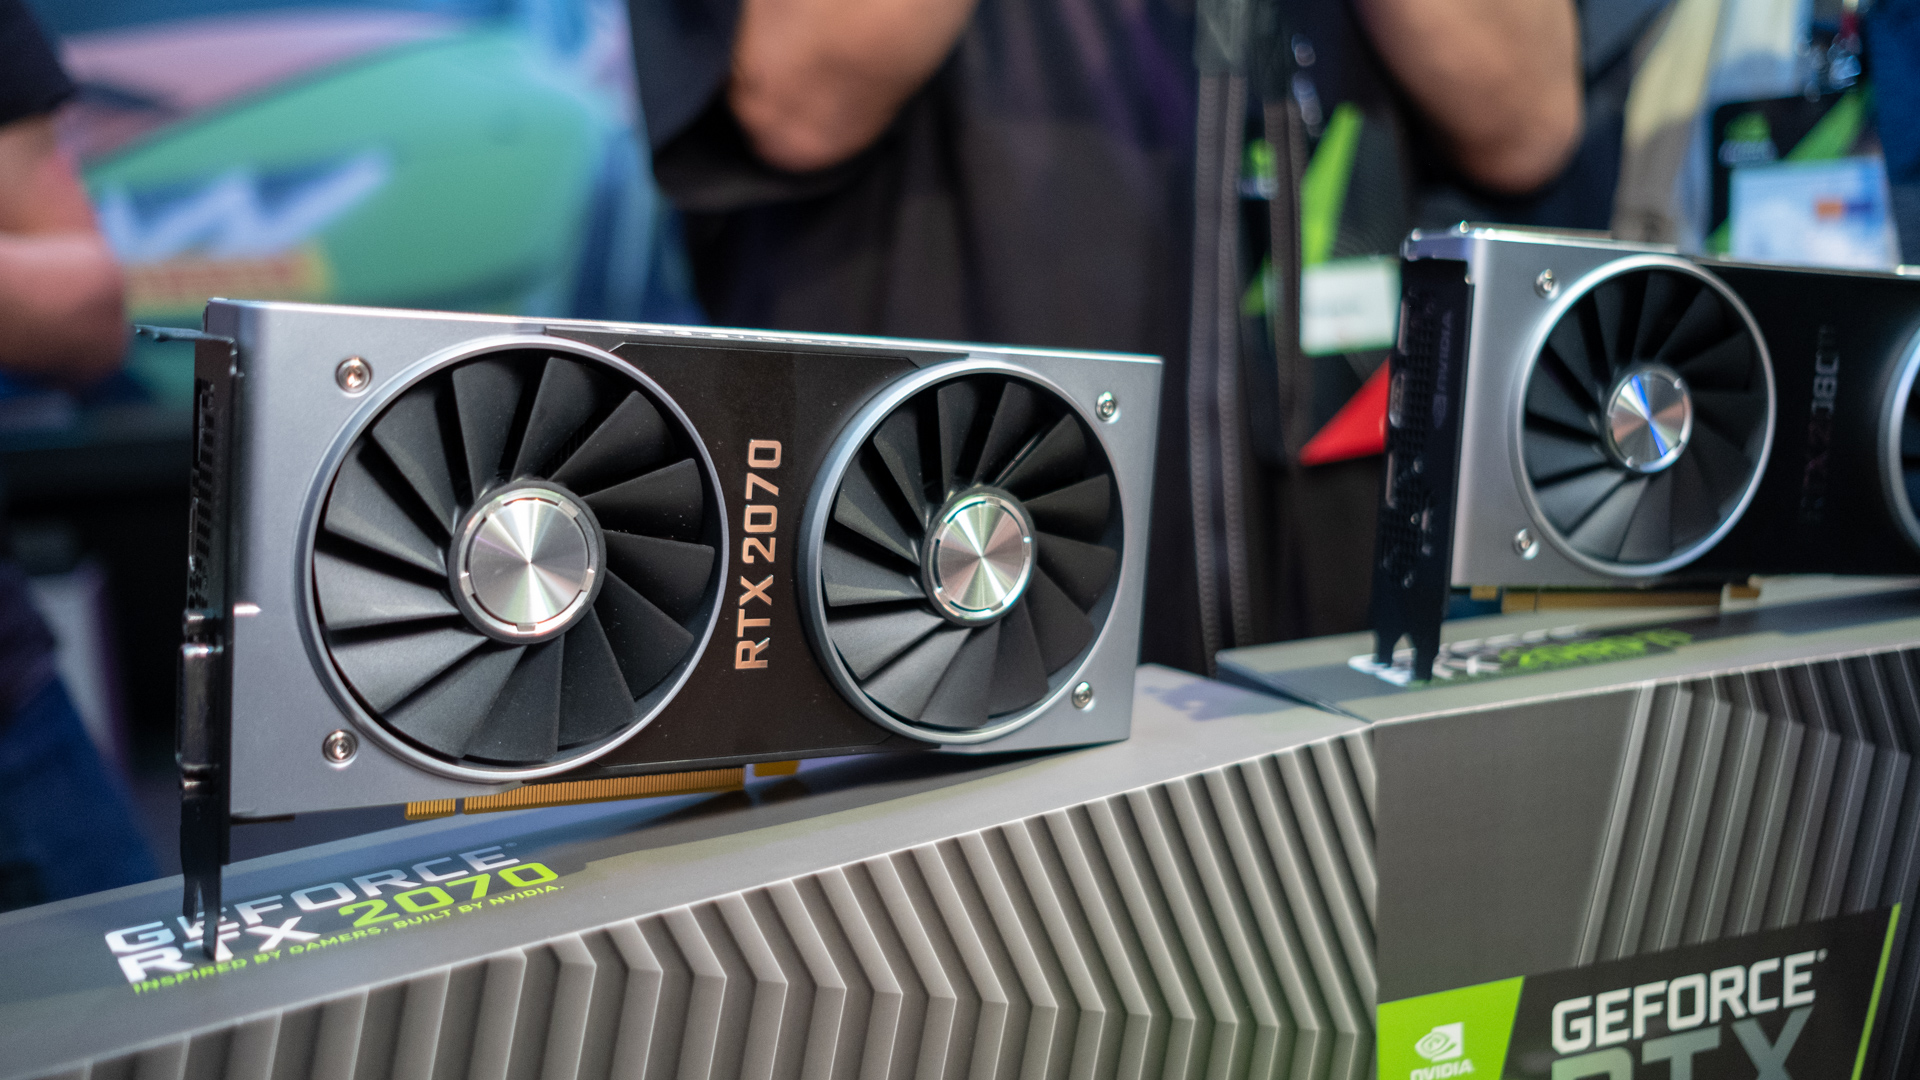 Nvidia GeForce RTX 2070 looks to be definitely faster than GTX